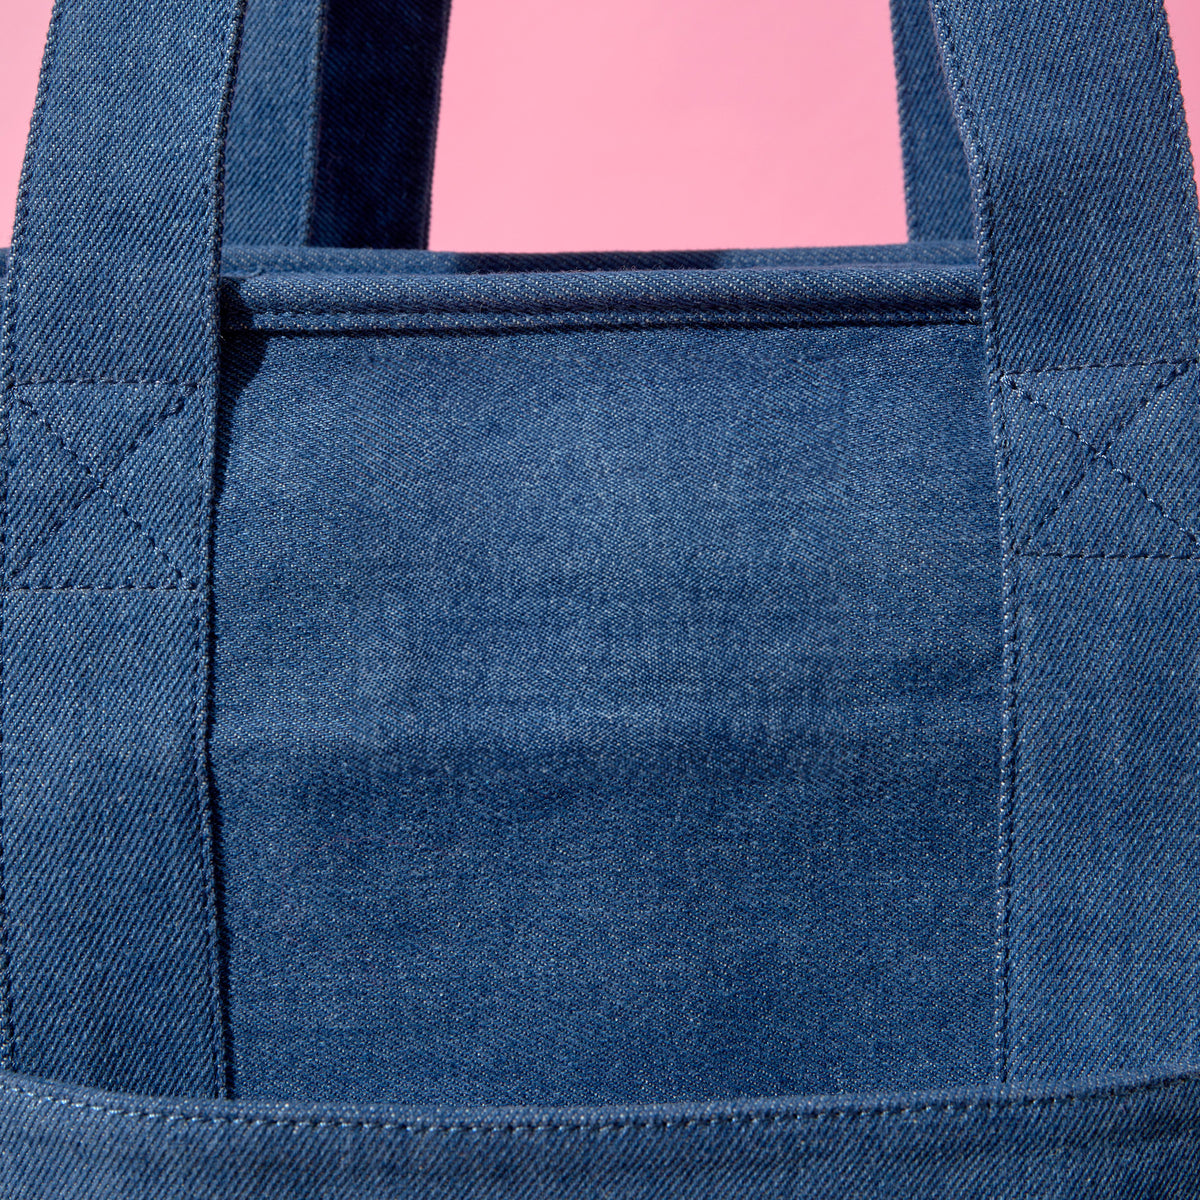 Personalized Denim Bow Tote Bag